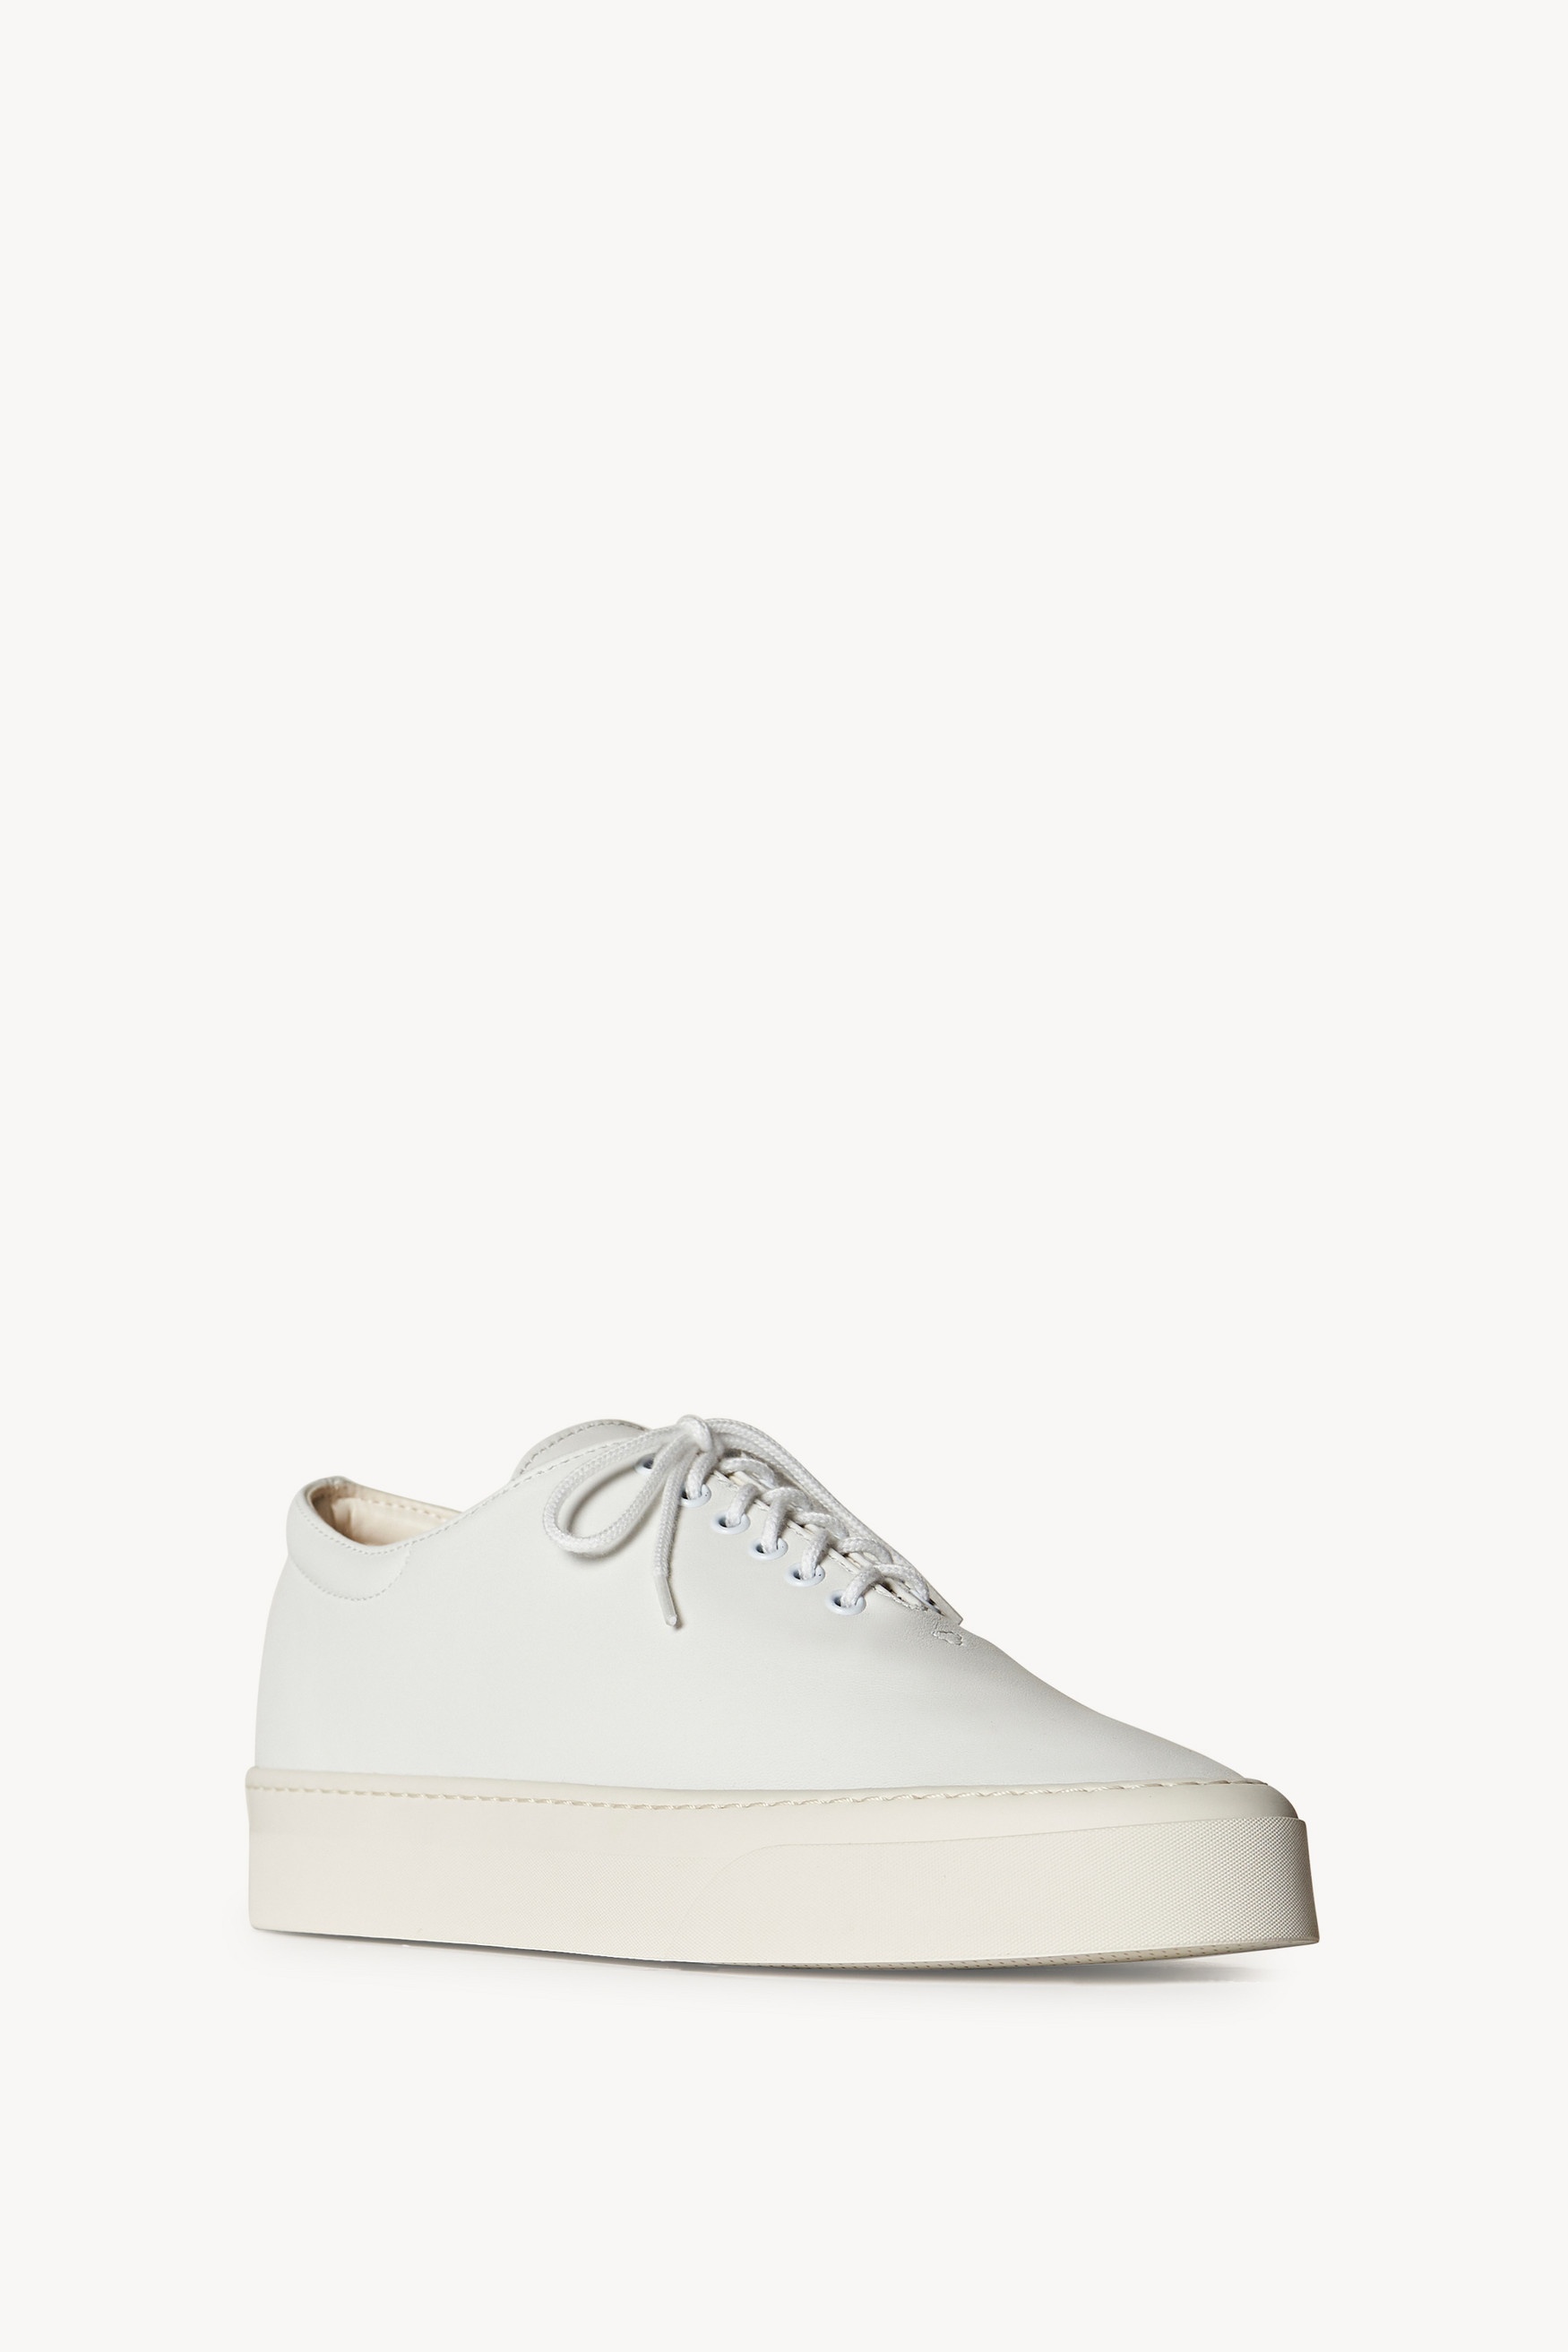 Marie H Lace-Up Sneaker in Leather - 2